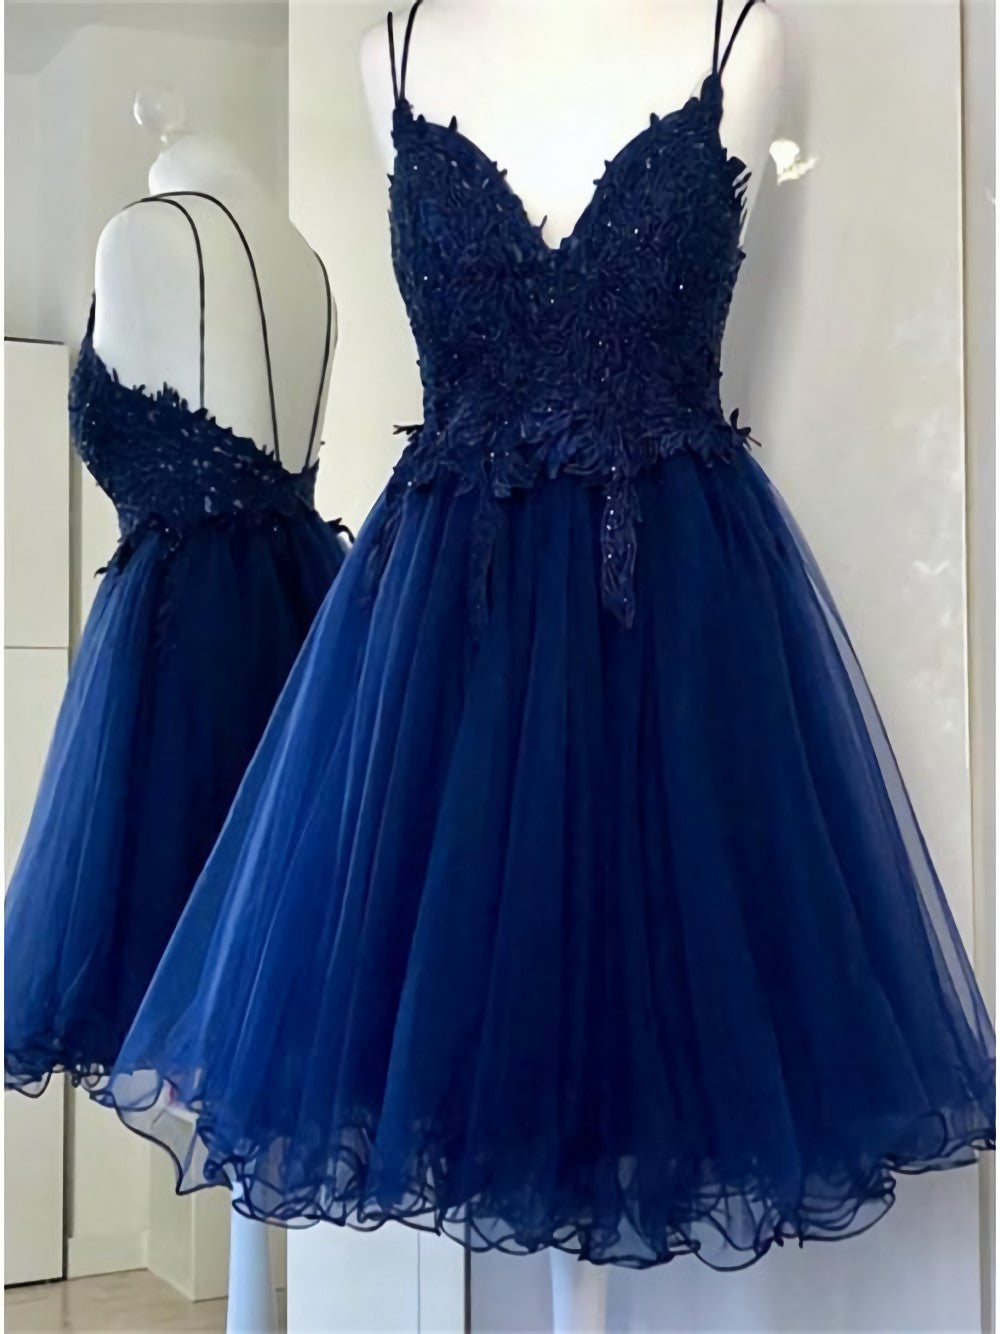 Formal Dress Black, A Line Dual Strapped Royal Blue V Neck Short Prom Dress With Beads Appliques